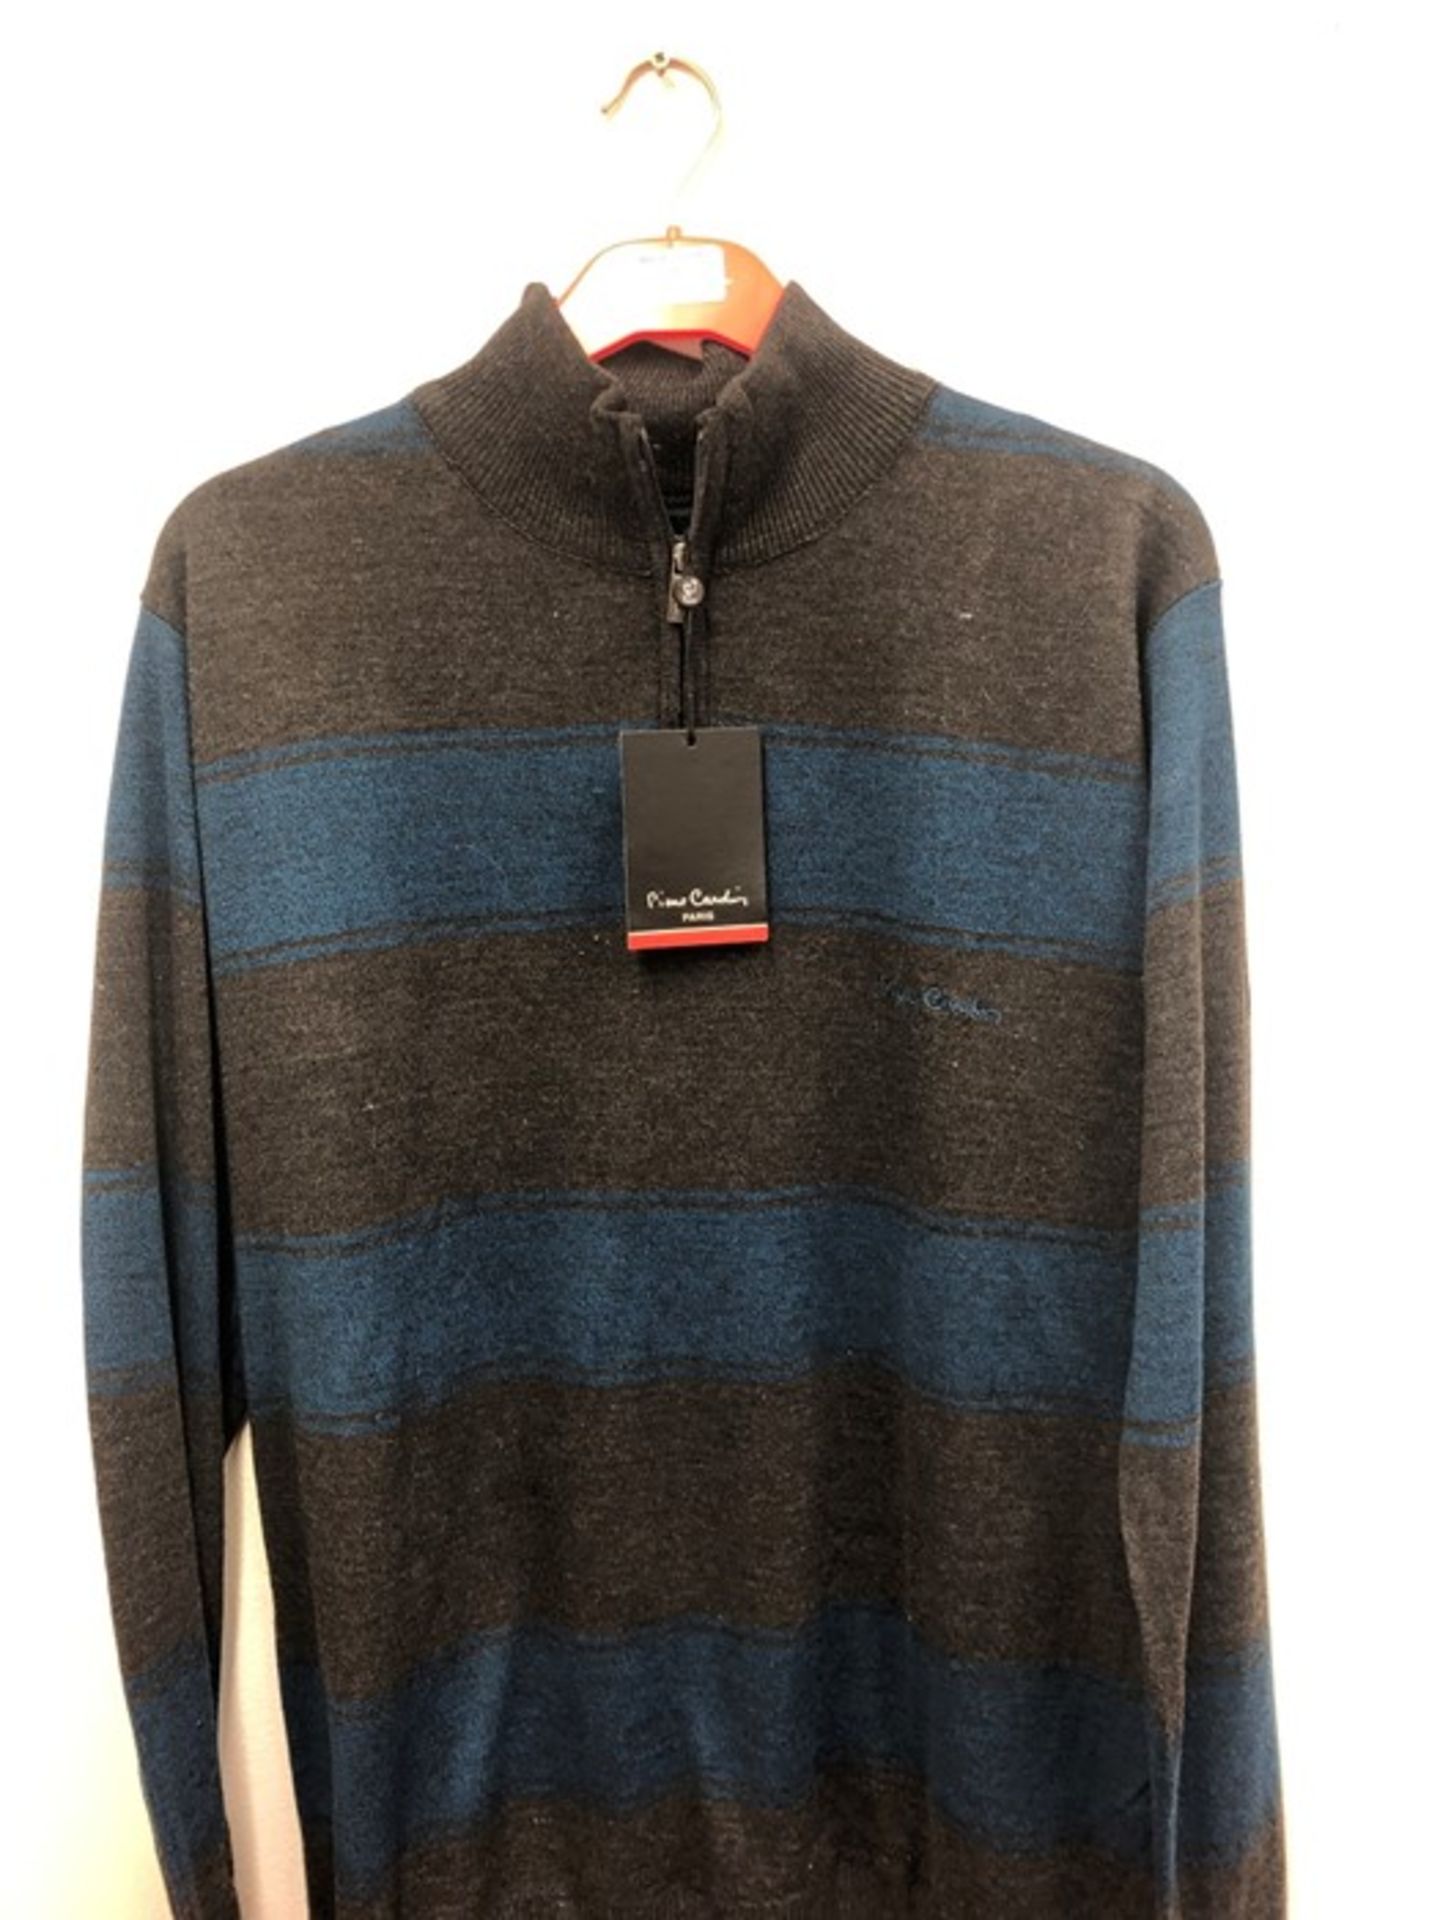 1 PIERRE CARDIN JUMPER / SIZE L (VIEWING HIGHKY RECOMMENDED)